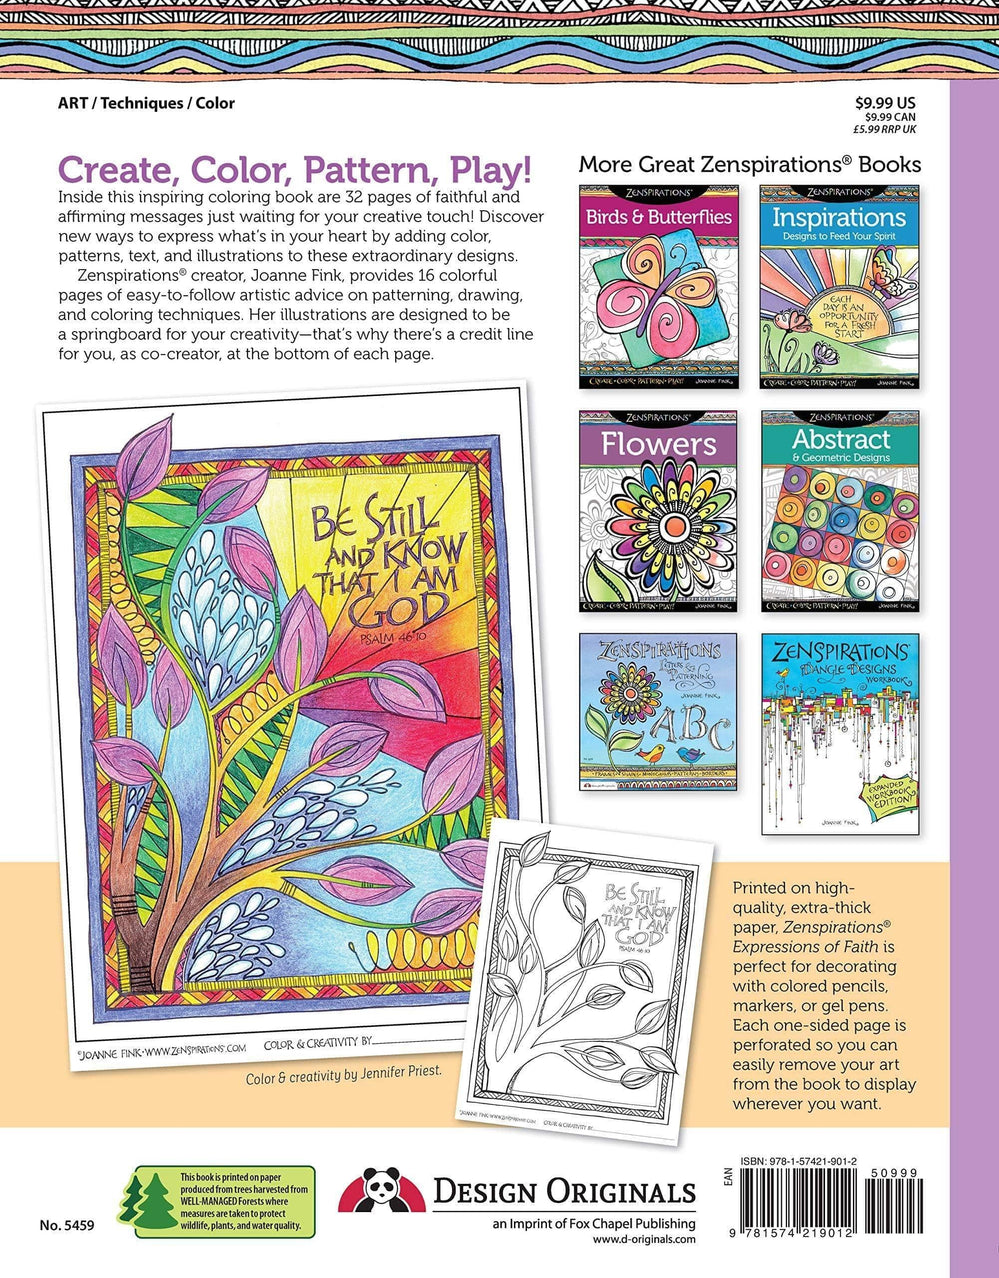 Zenspirations (R) Coloring Book Expressions of Faith: Create, Color, Pattern, Play! - Pura Vida Books